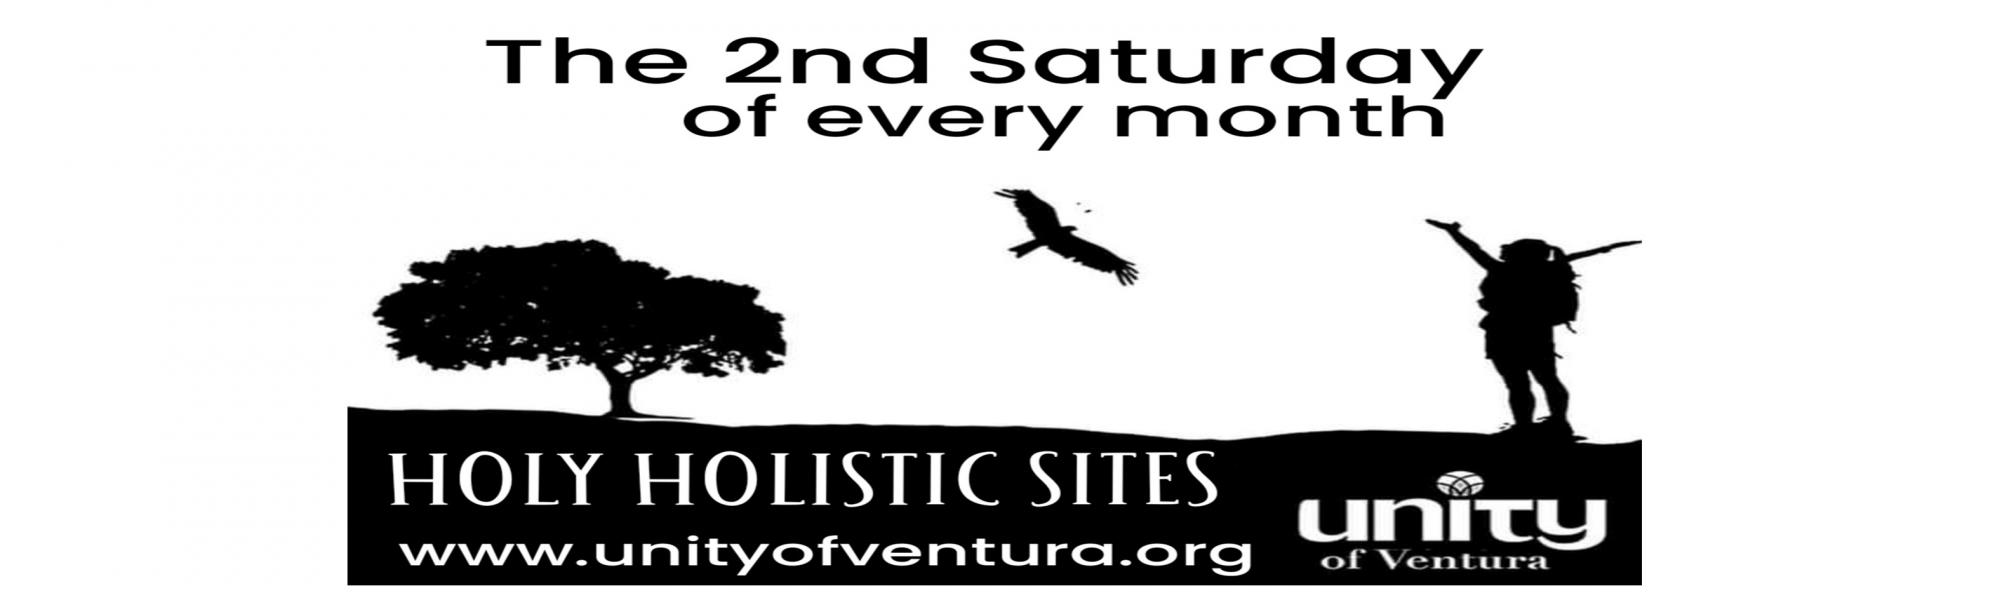 Holy Holistic Hikes - 2nd Saturday of Every Month!